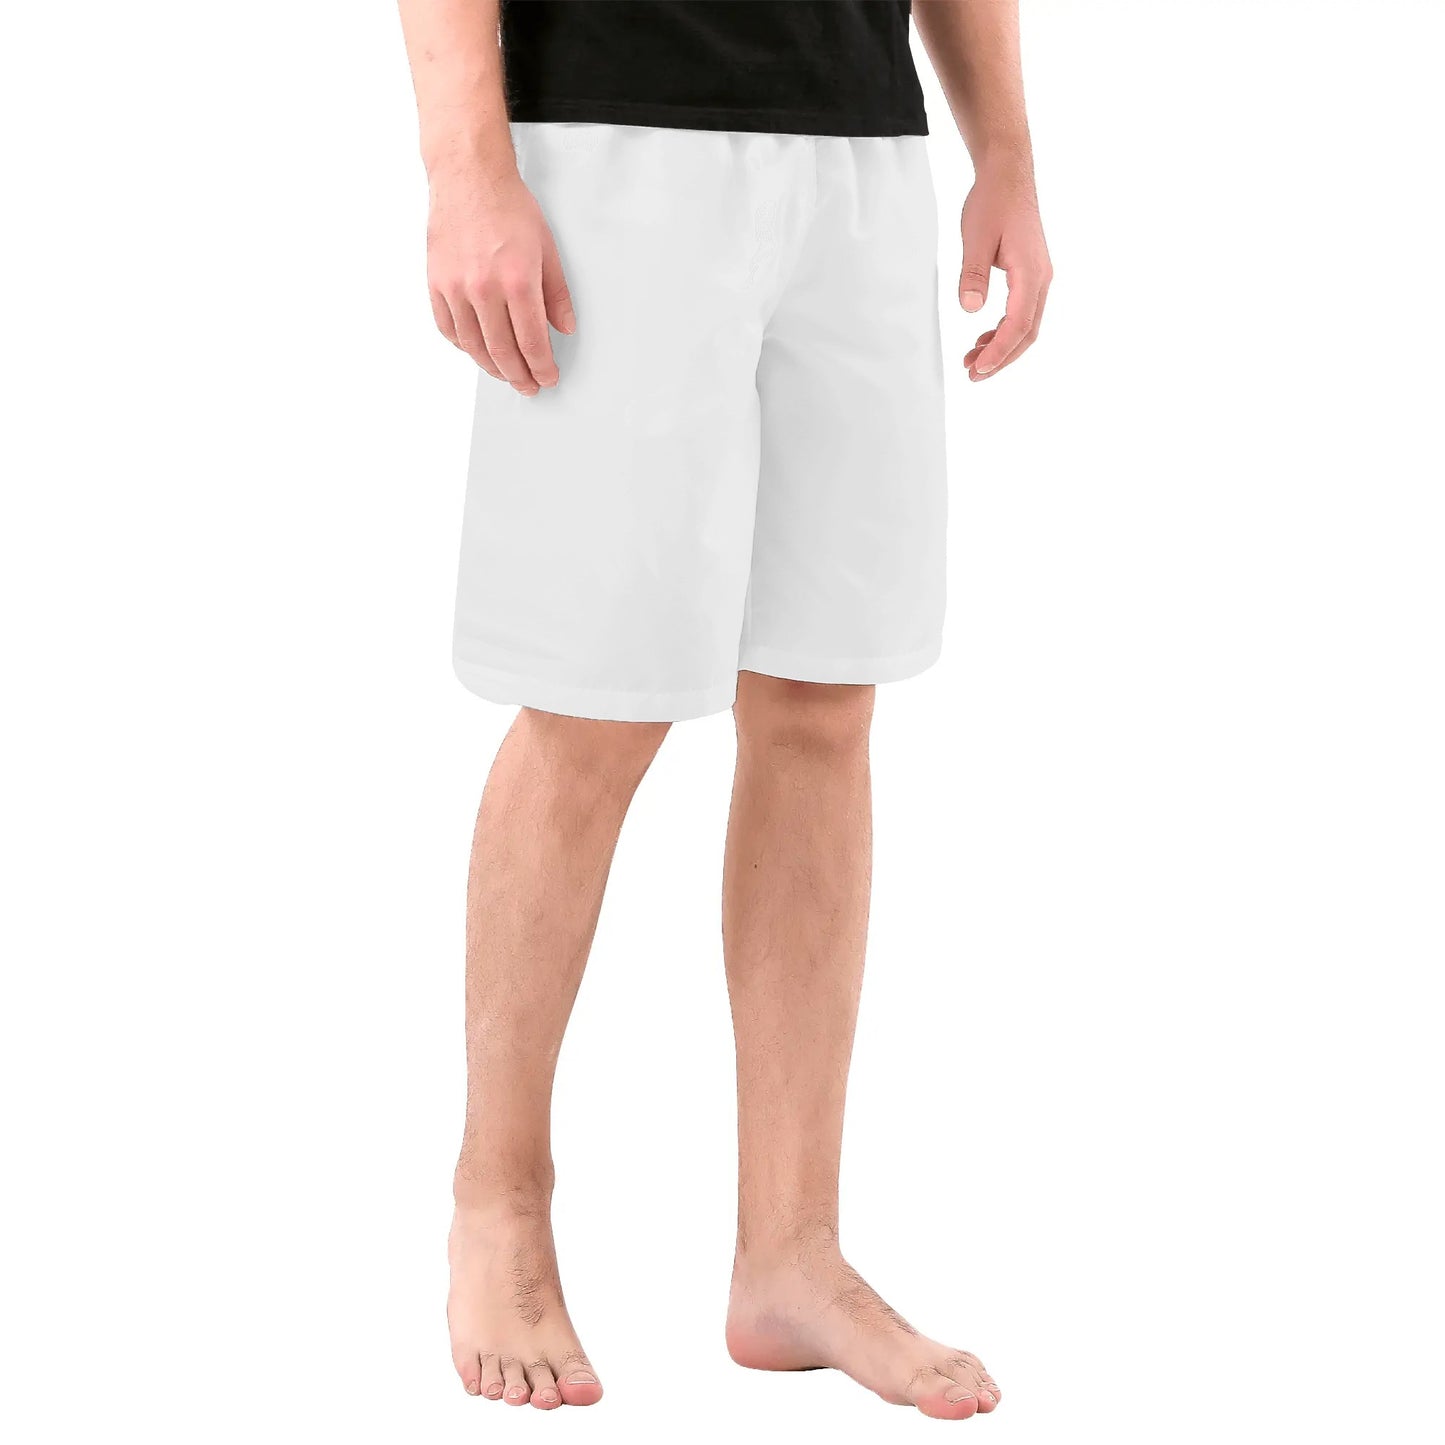 CLEAN BROWN LOGOED SHORTS